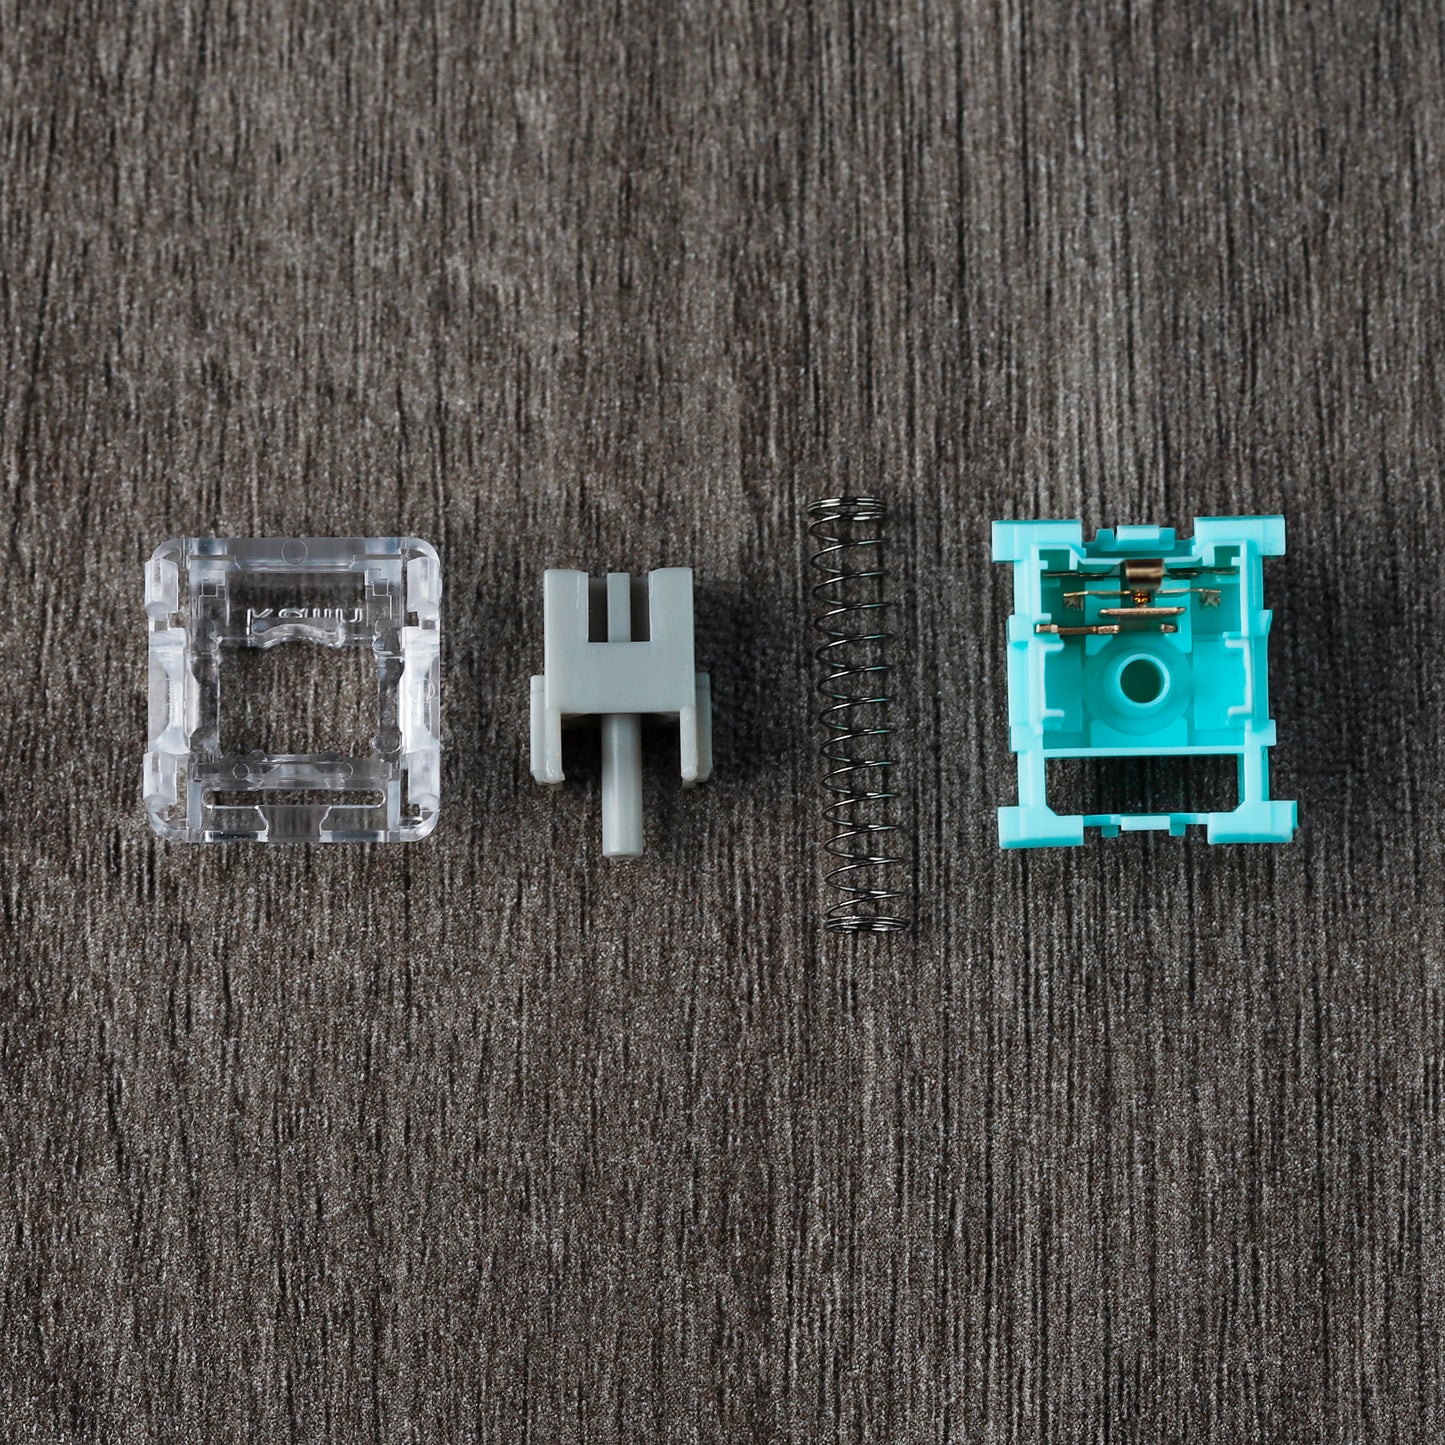 Kailh x Skyloong 5 Pin Linear Mechanical Switch Transparent Cover 40gf Lavender 45gf Speed Silver for Mechanical Keyboard